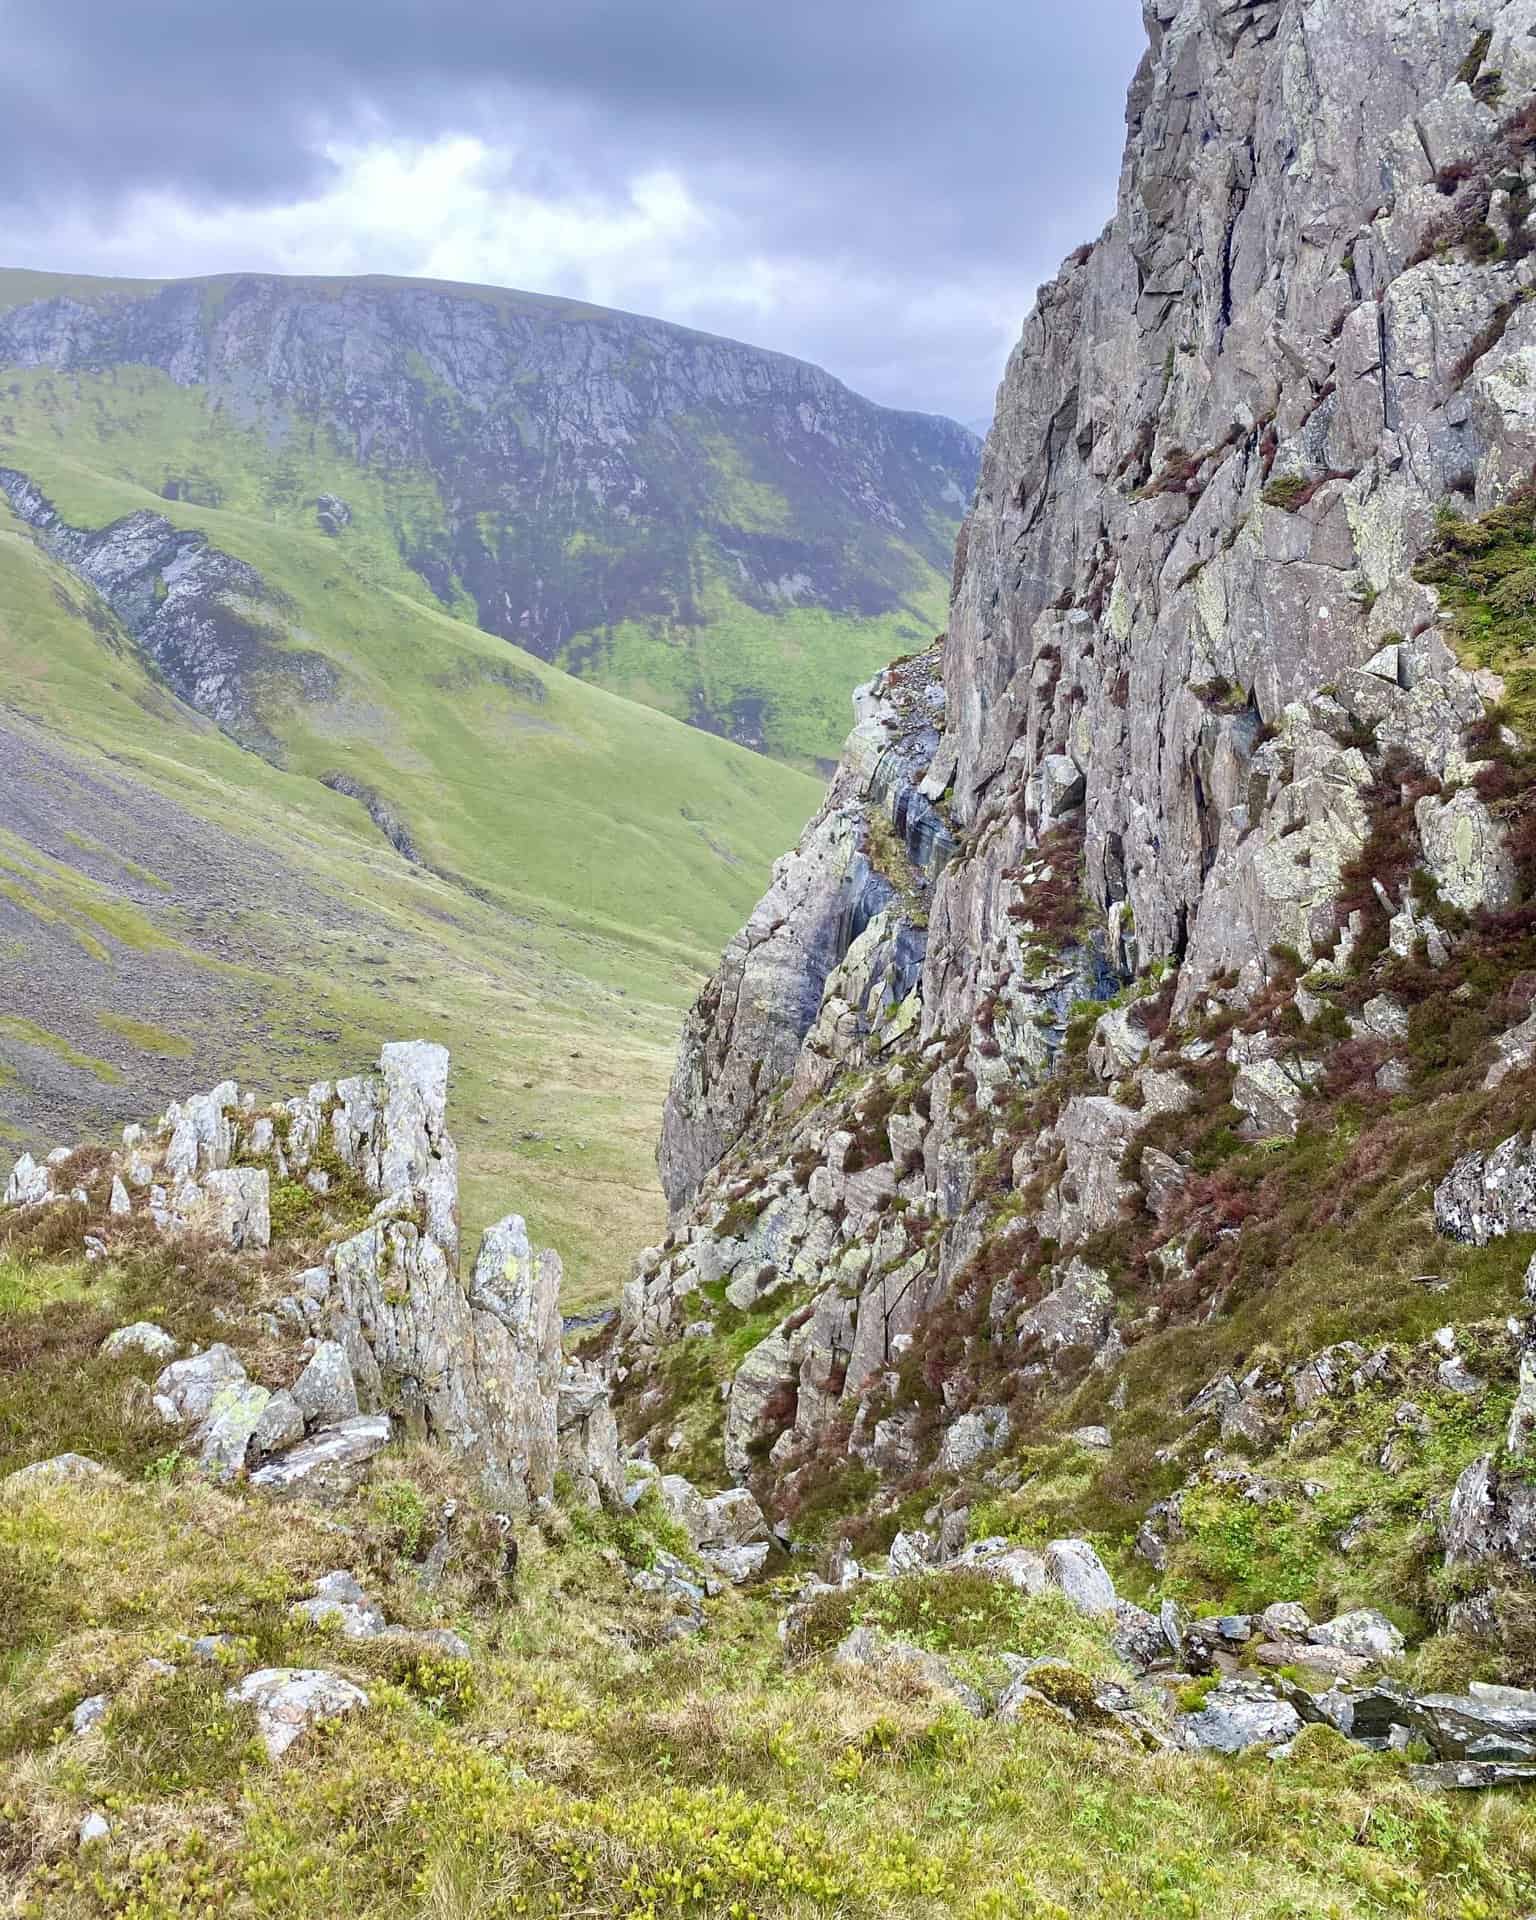 The view of Hindscarth Crags from the southern flanks of High Spy. The deep cut in the rocky landscape (on the left in both pictures) has been created by Far Tongue Gill, a tributary of Newlands Beck.